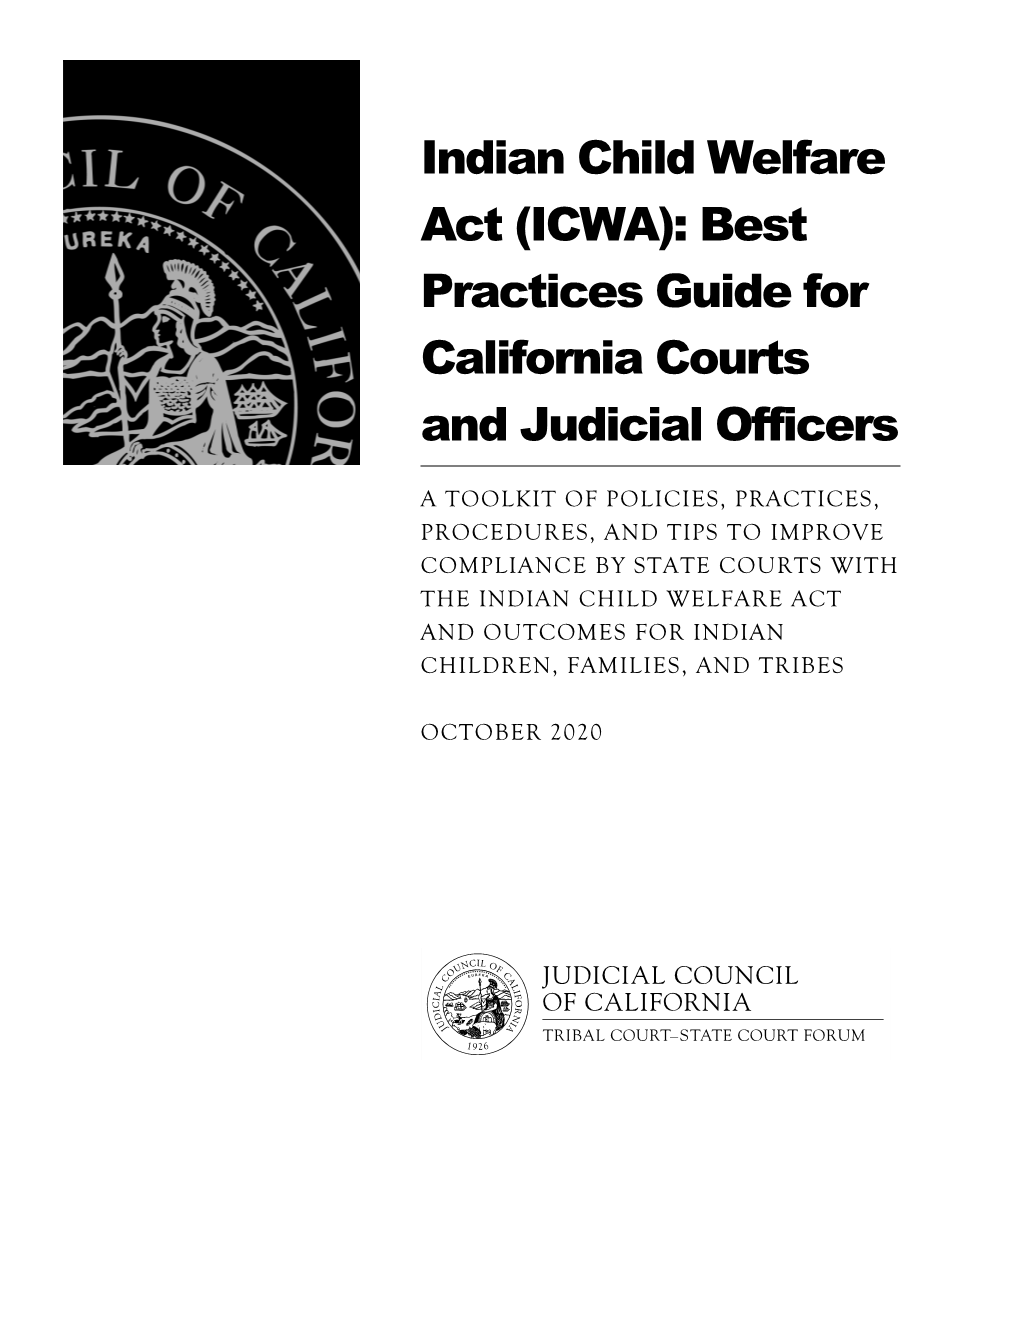 Indian Child Welfare Act (ICWA): Best Practices Guide for California Courts and Judicial Officers